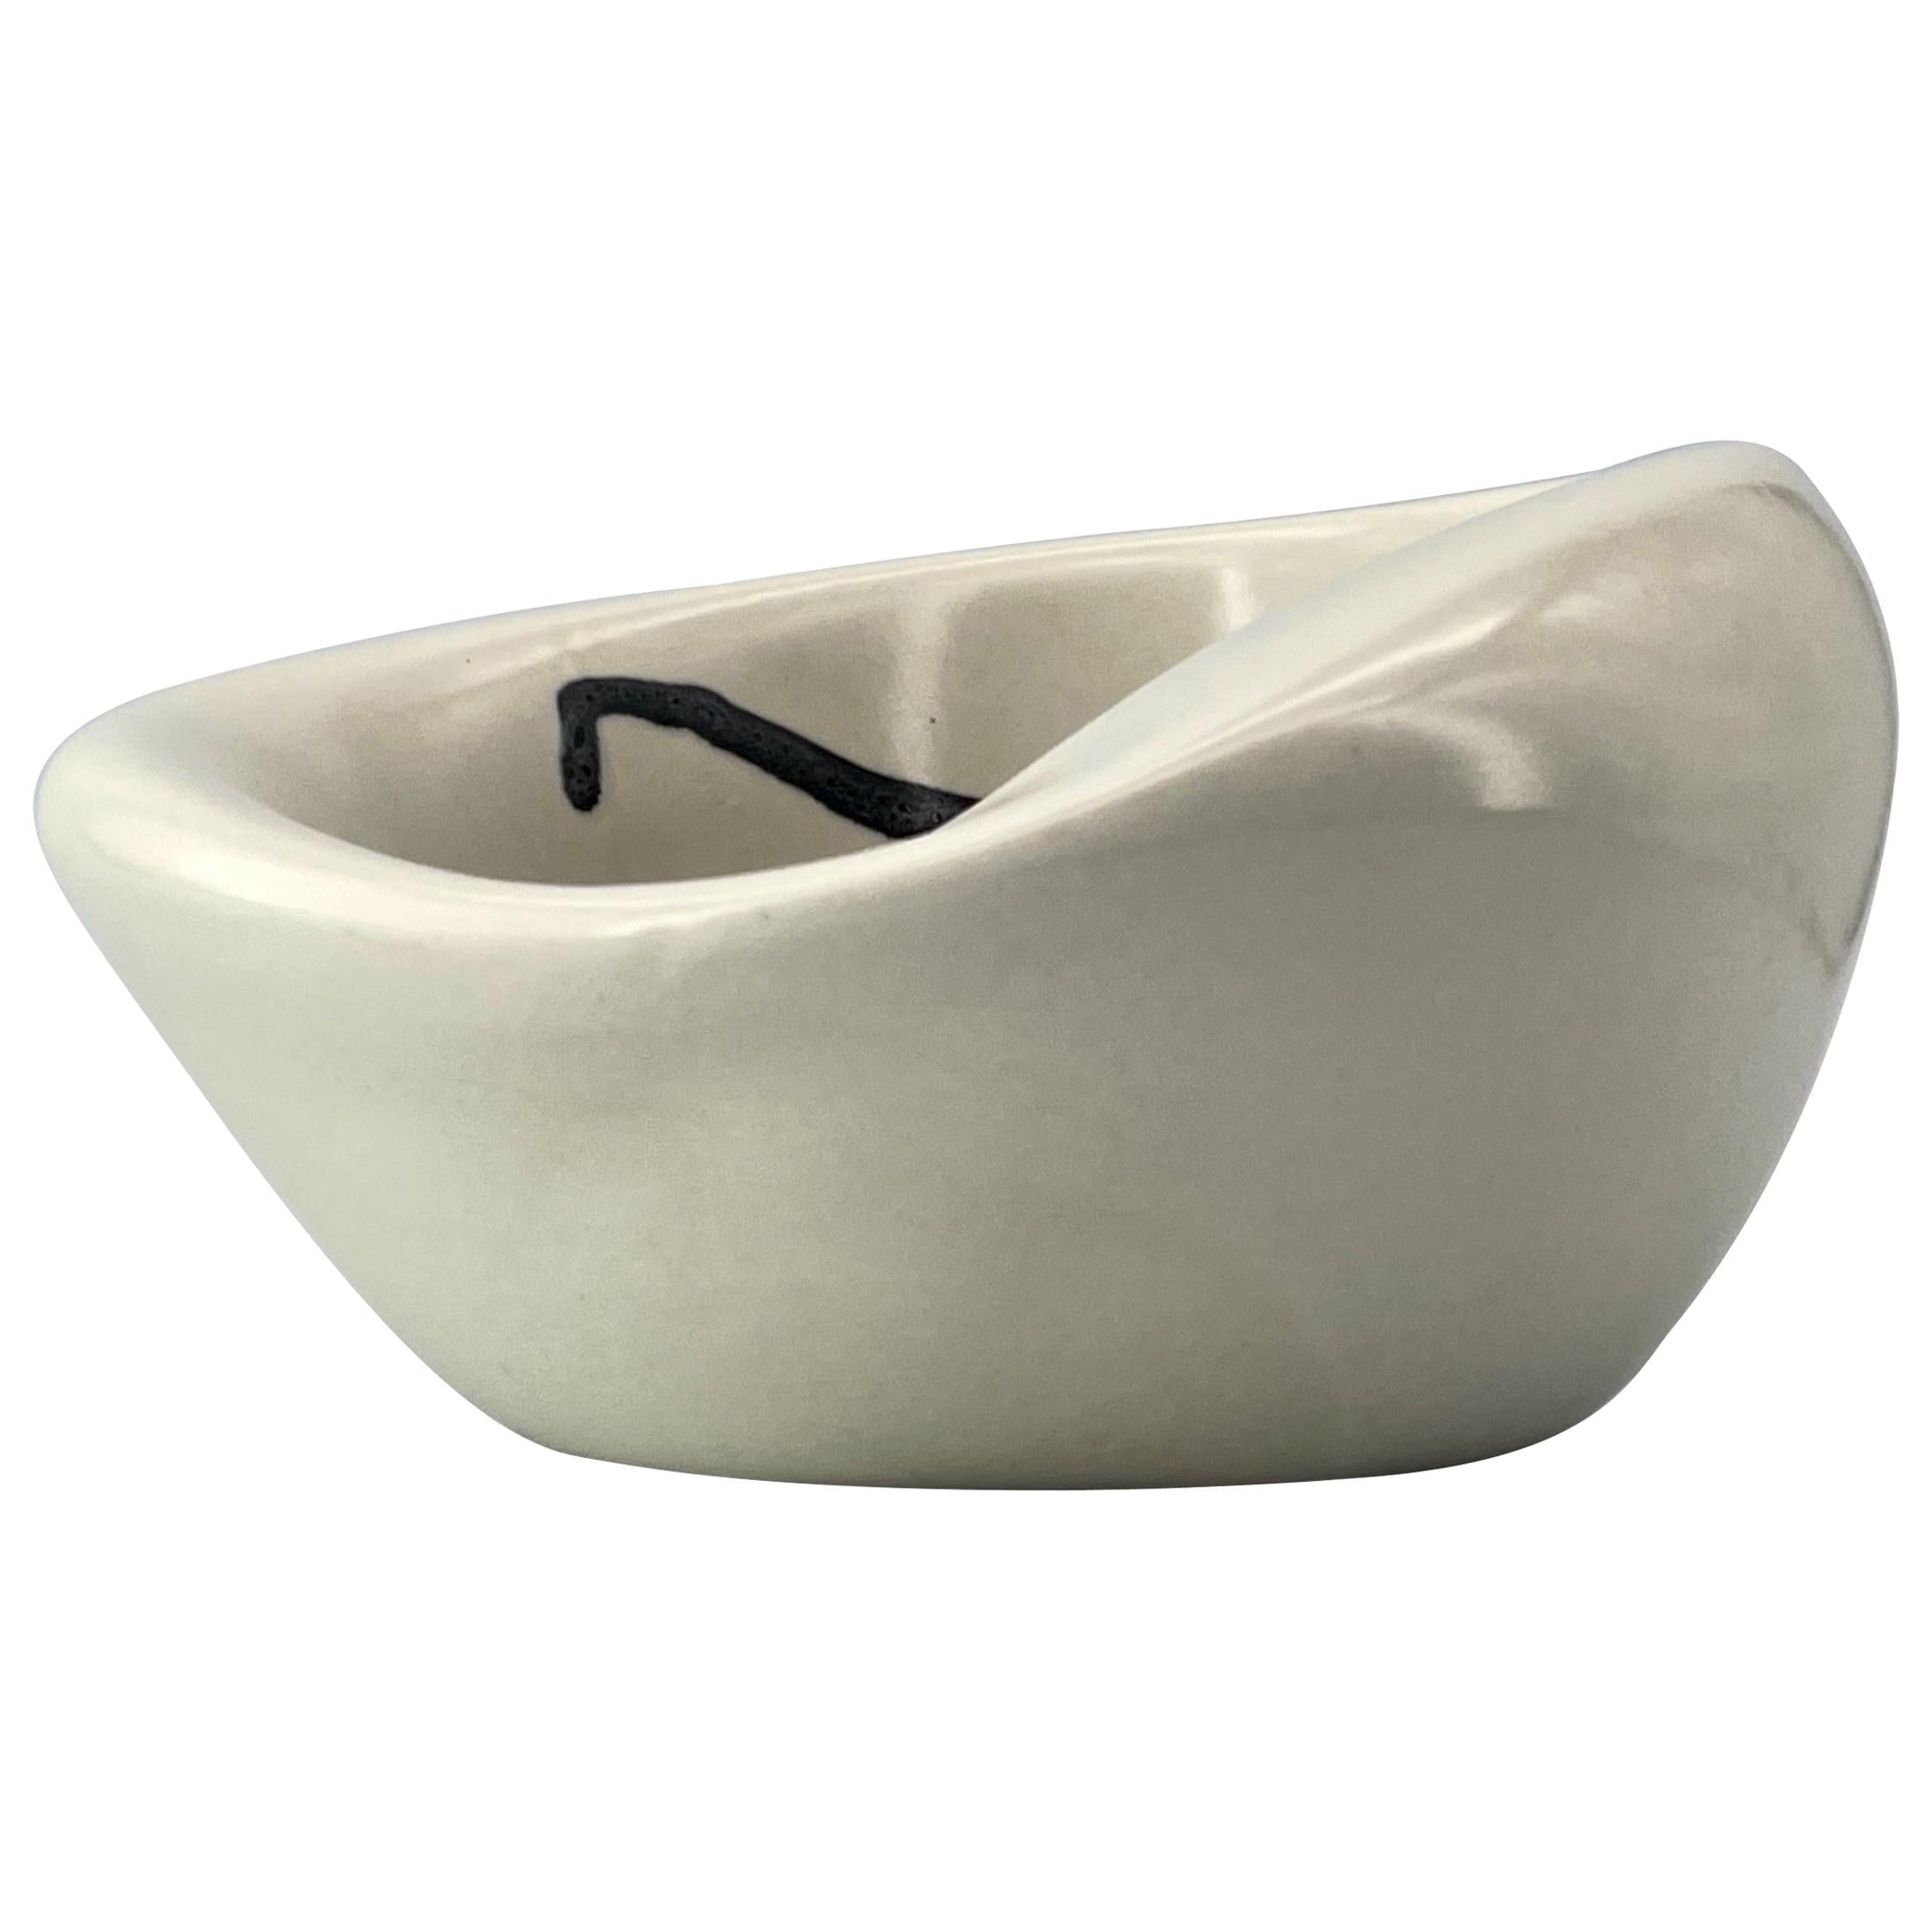 1960s White Organic Modern Abstract Centerpiece Bowl Cigar Ashtray Jouve Dish For Sale